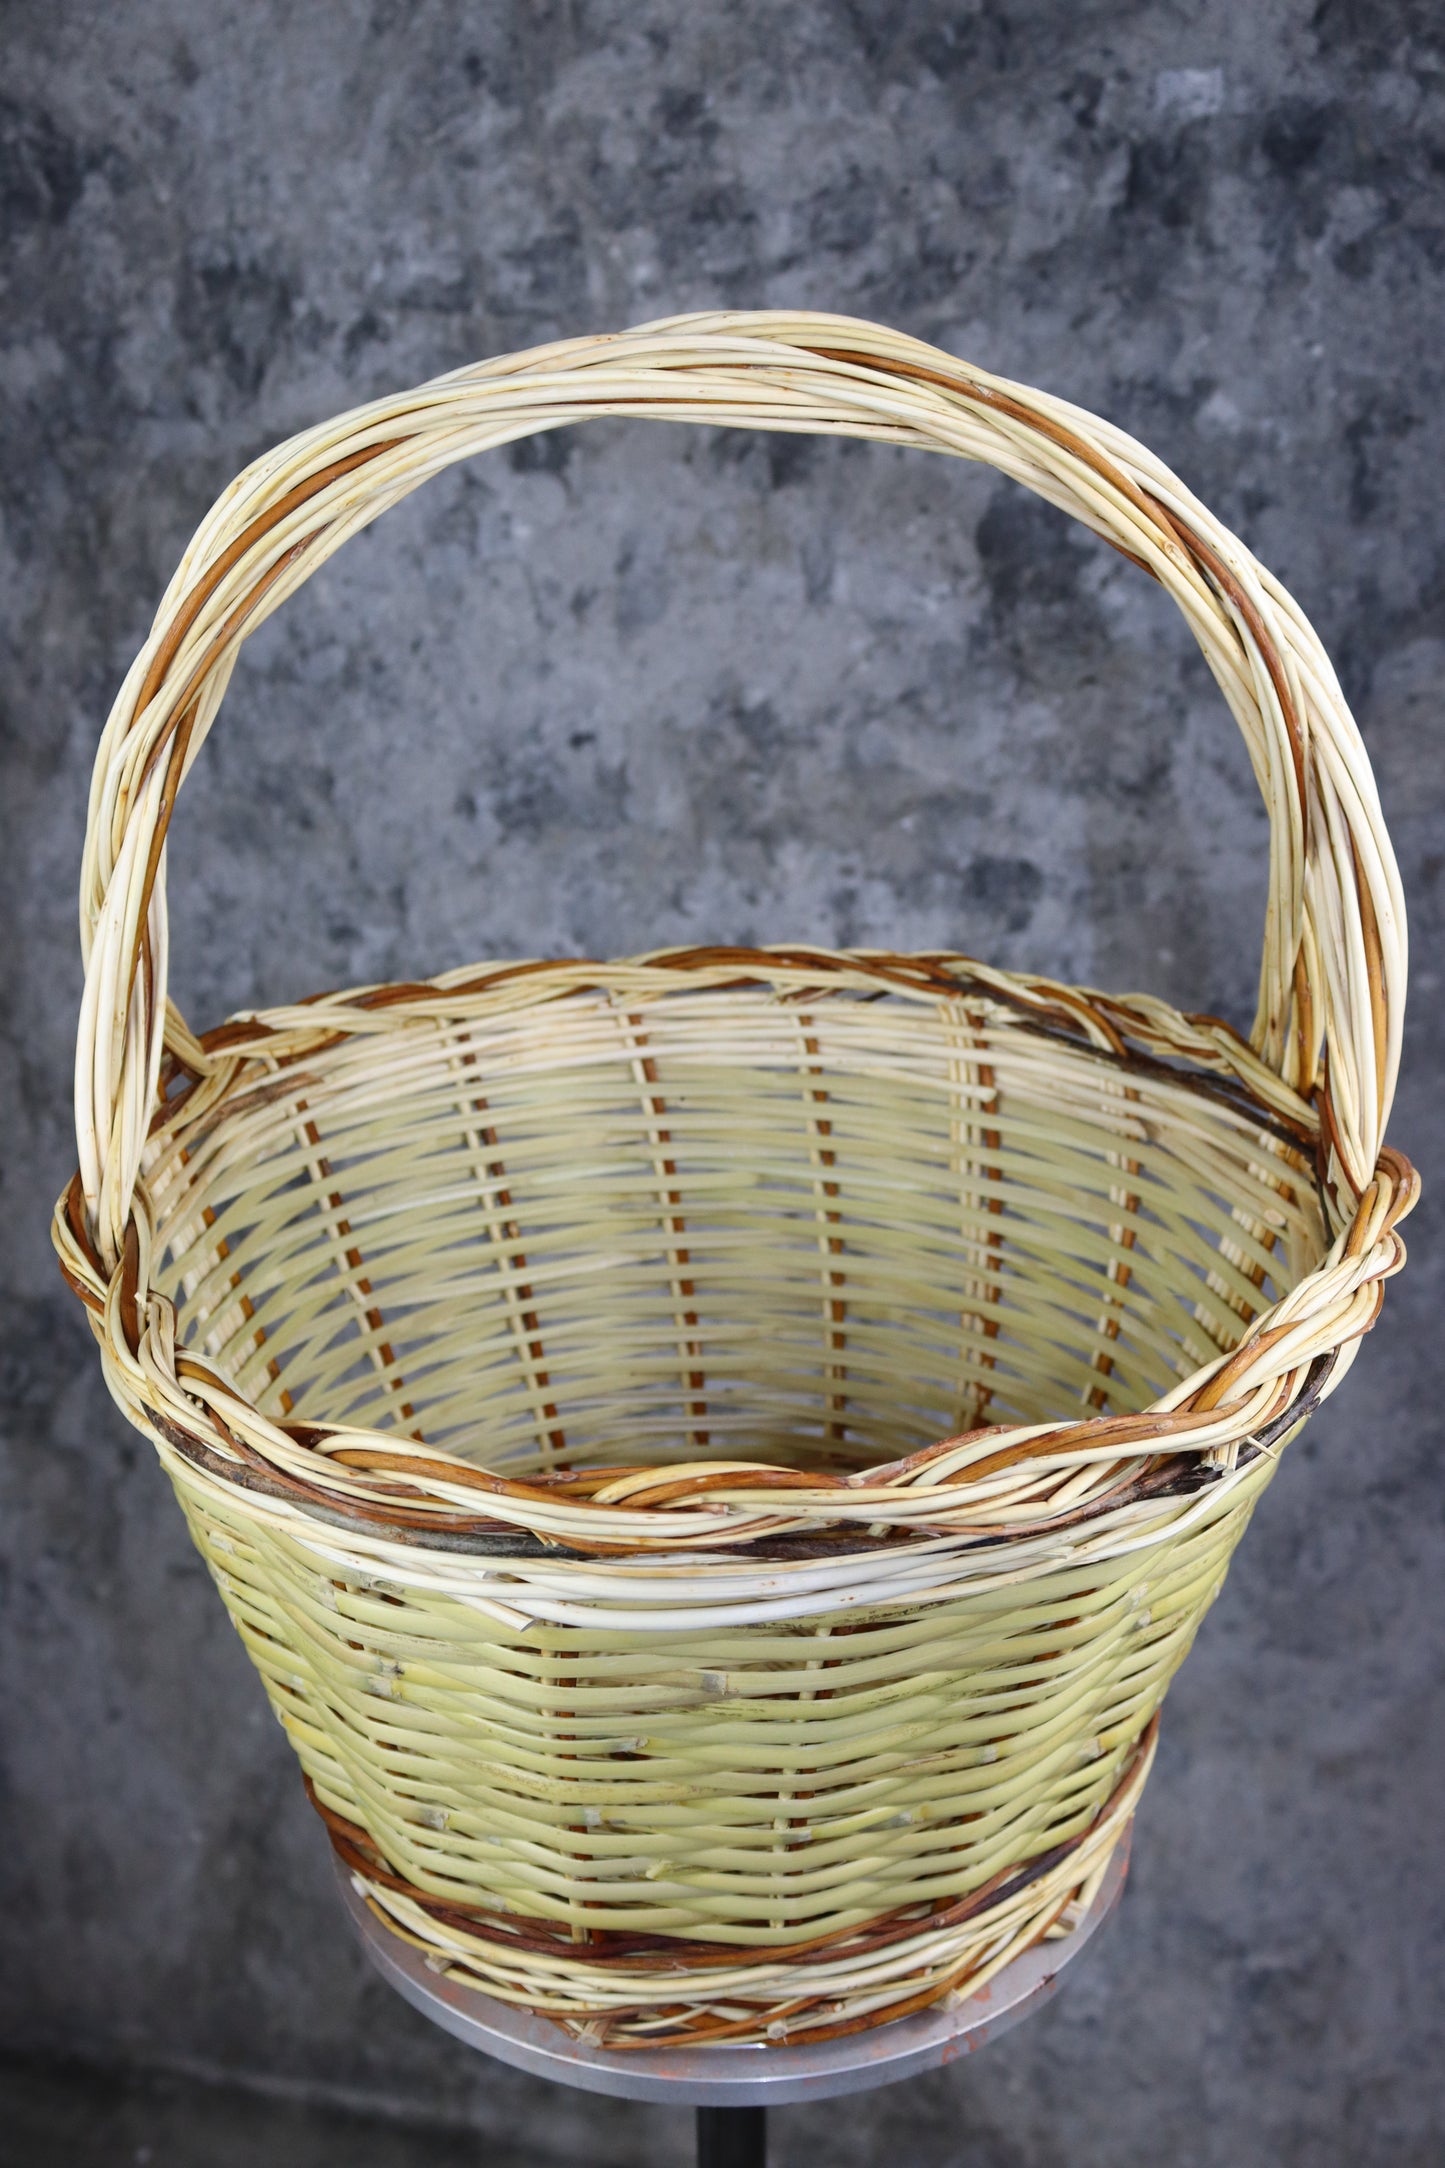 Large hand-woven willow basket. Mushroom basket with handle